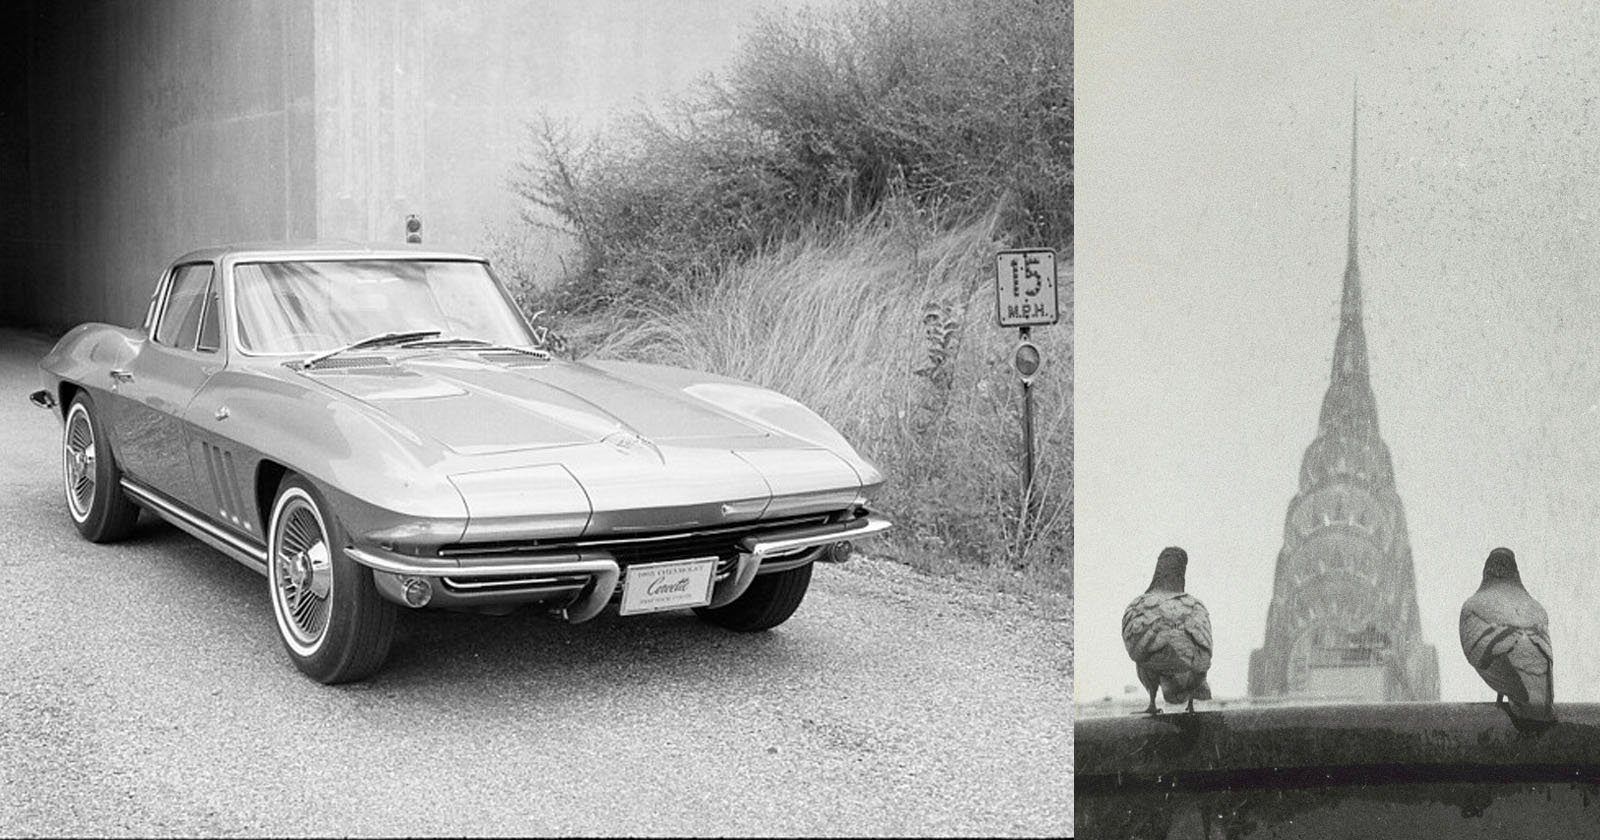 A split image featuring a classic Chevrolet Corvette parked on a road with a speed limit sign, "15 MPH", and dense bushes behind it (left). The right side shows two pigeons perched on a ledge overlooking the Chrysler Building spire in a foggy setting.